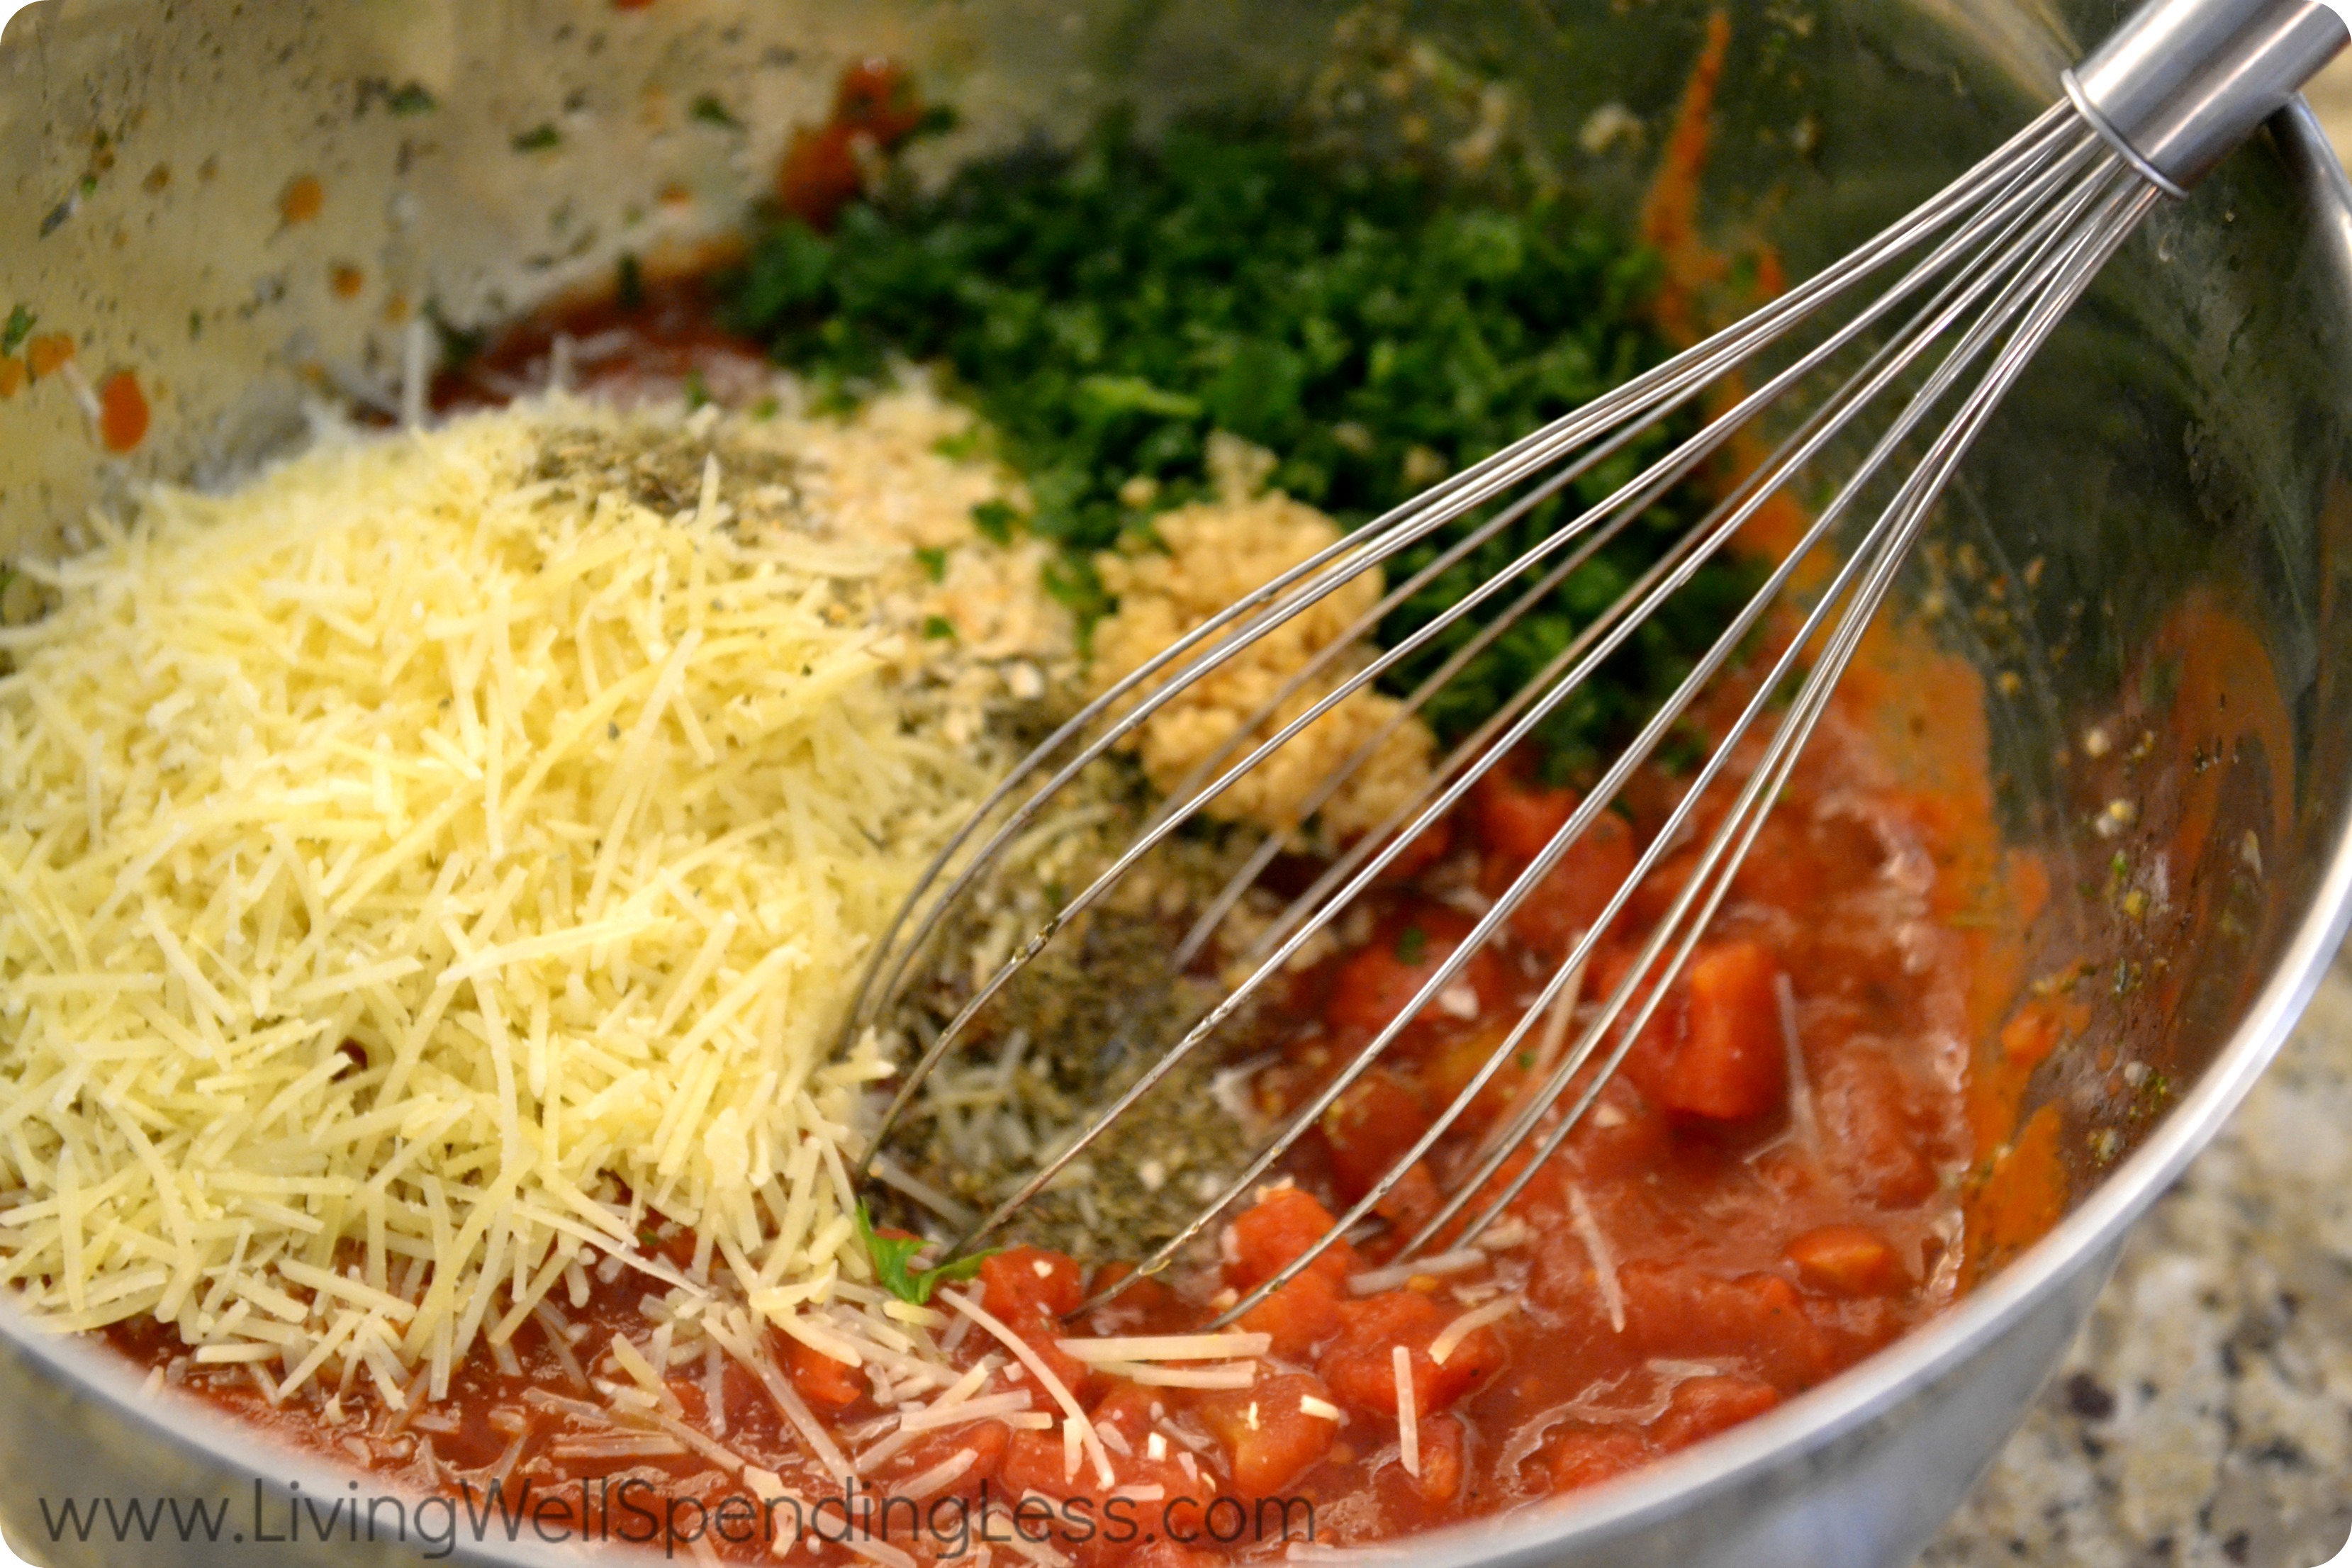 In a large bowl, combine seasonings, cheese, tomatoes, and parsley.